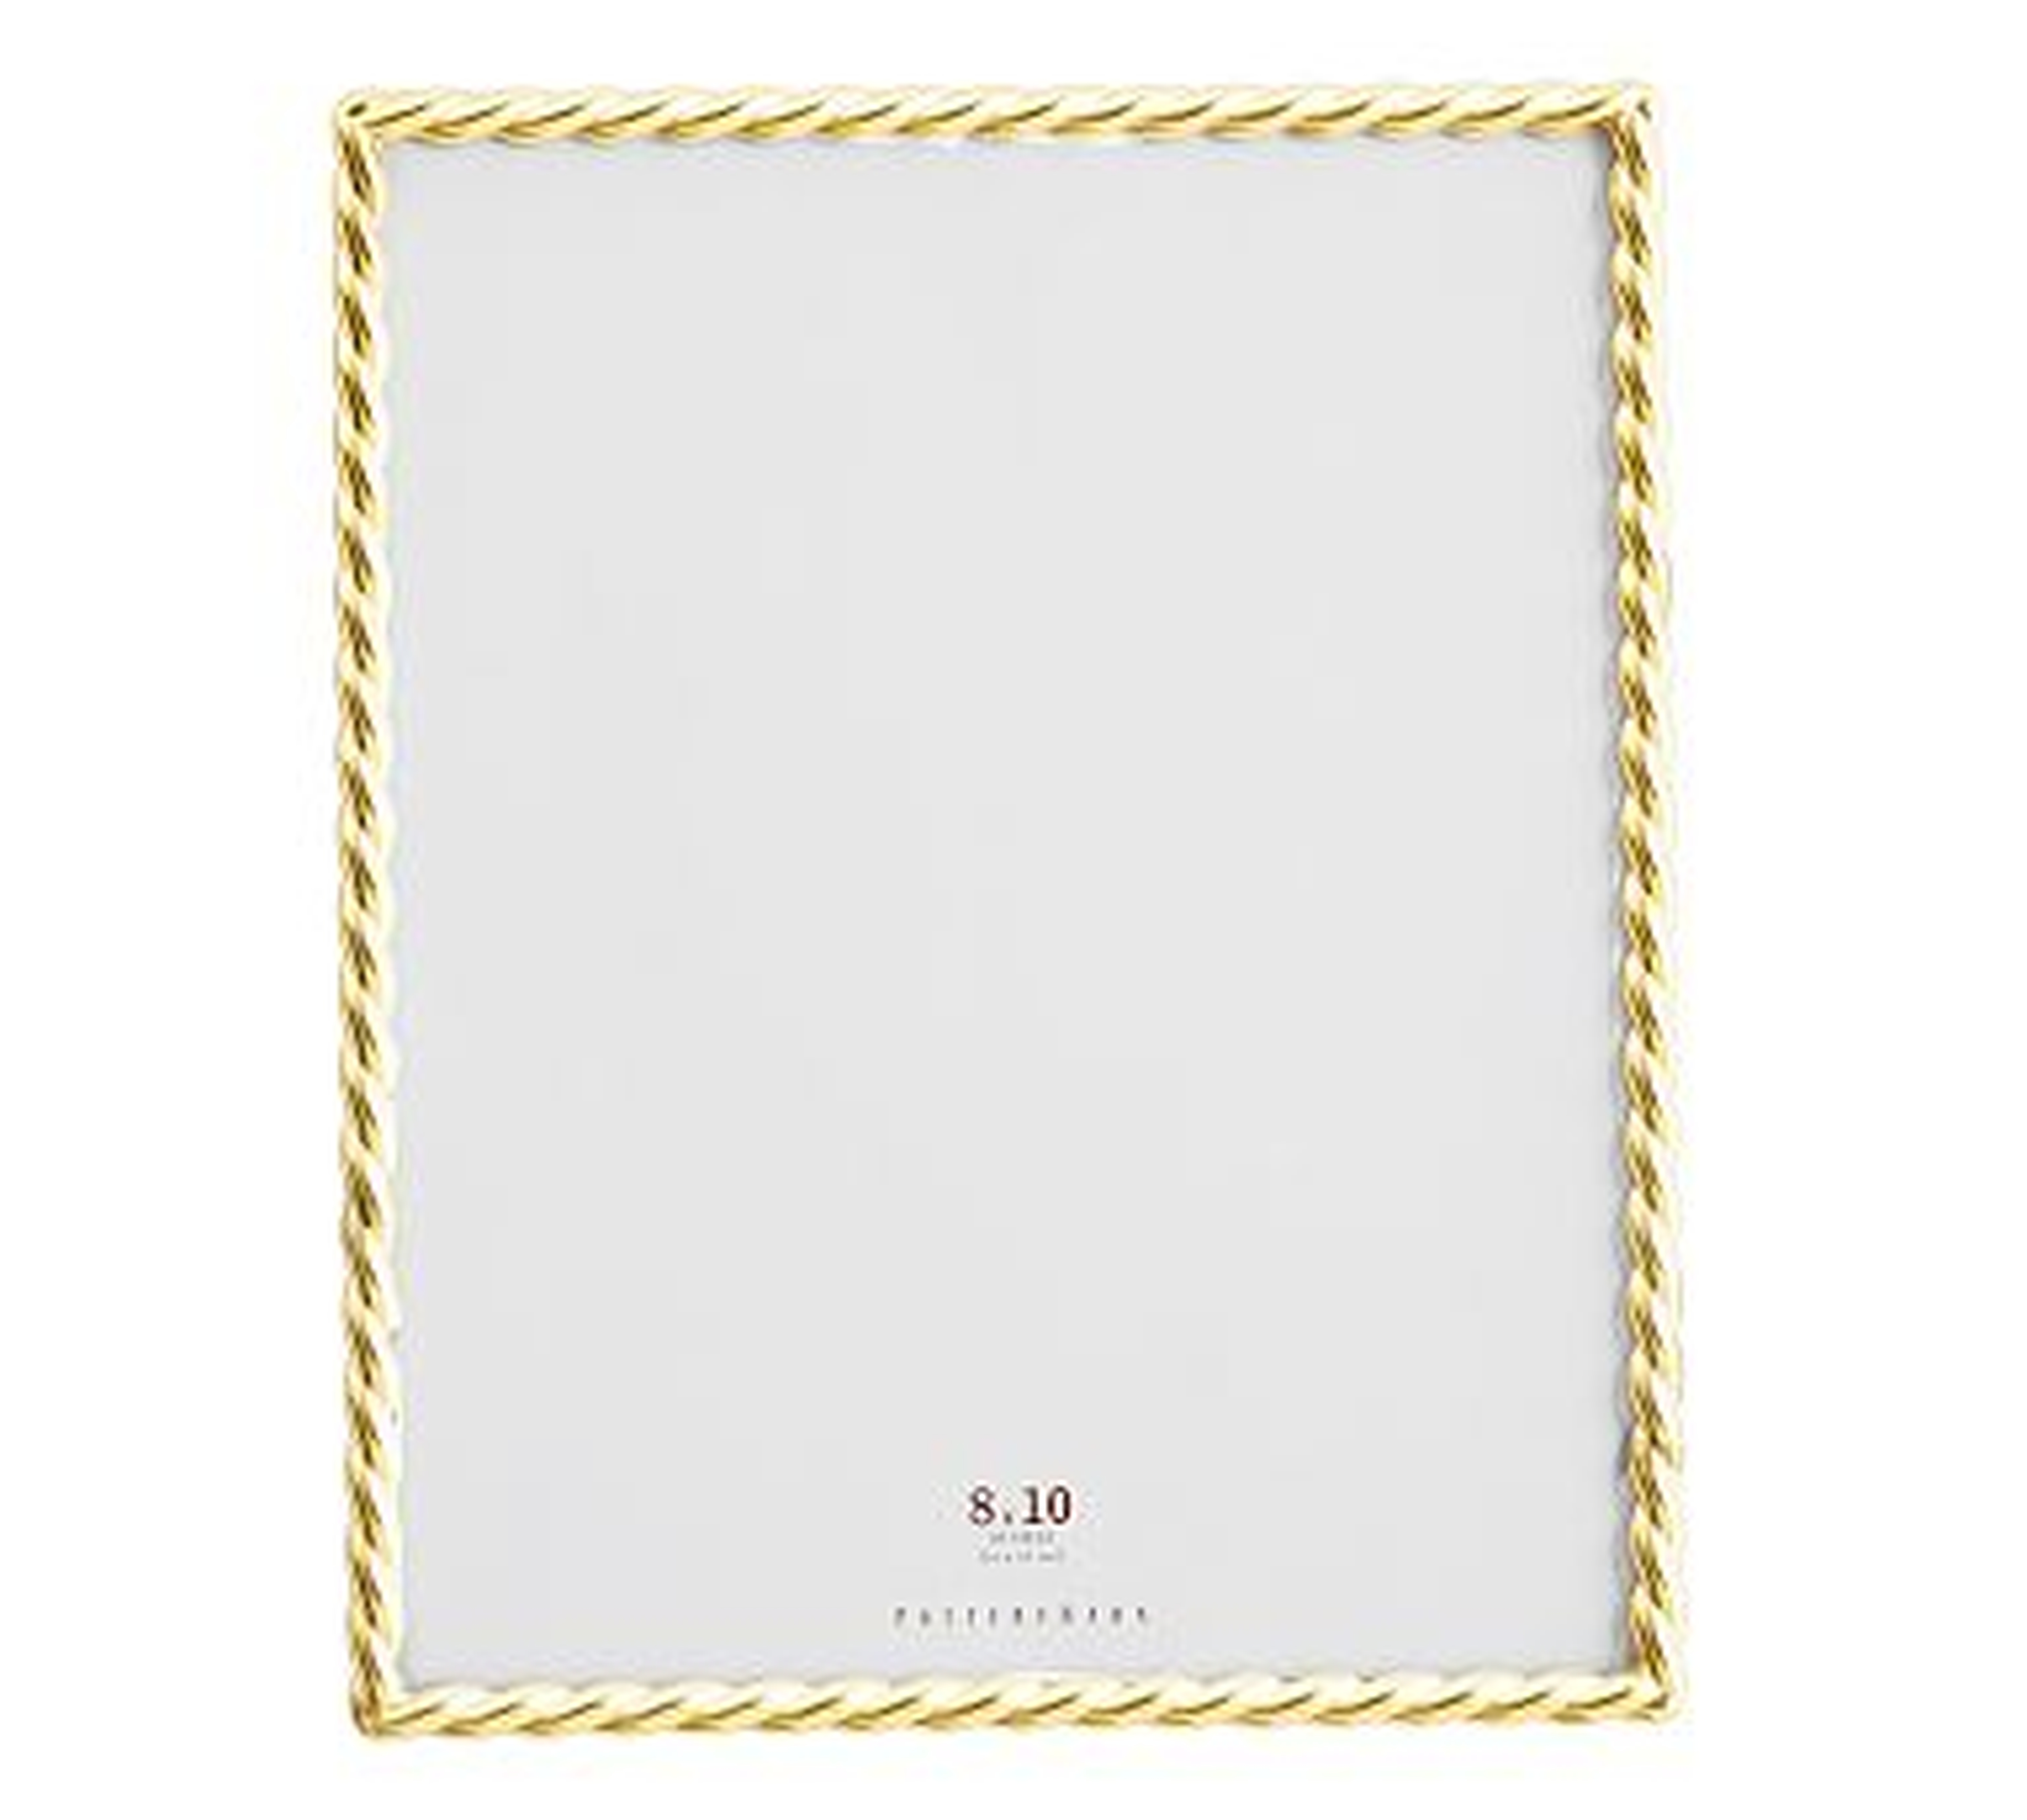 Rope Plated Frame, Gold - 8 x 10" - Pottery Barn